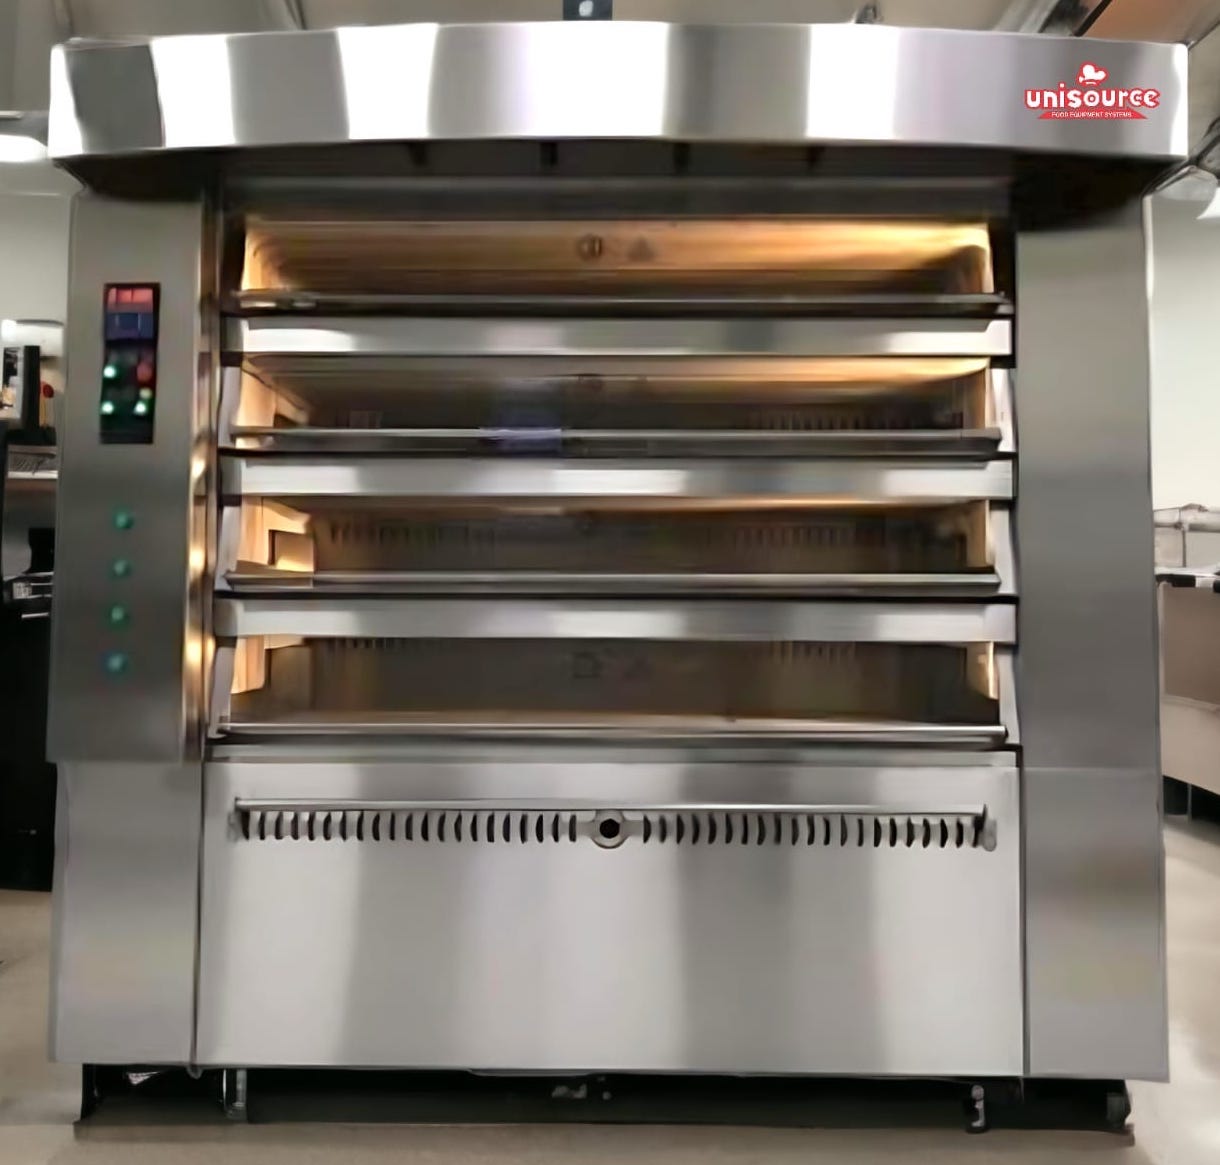 Gas Deck Ovens for Bread, Rolls, Pastries, Pies, Cookies & More.